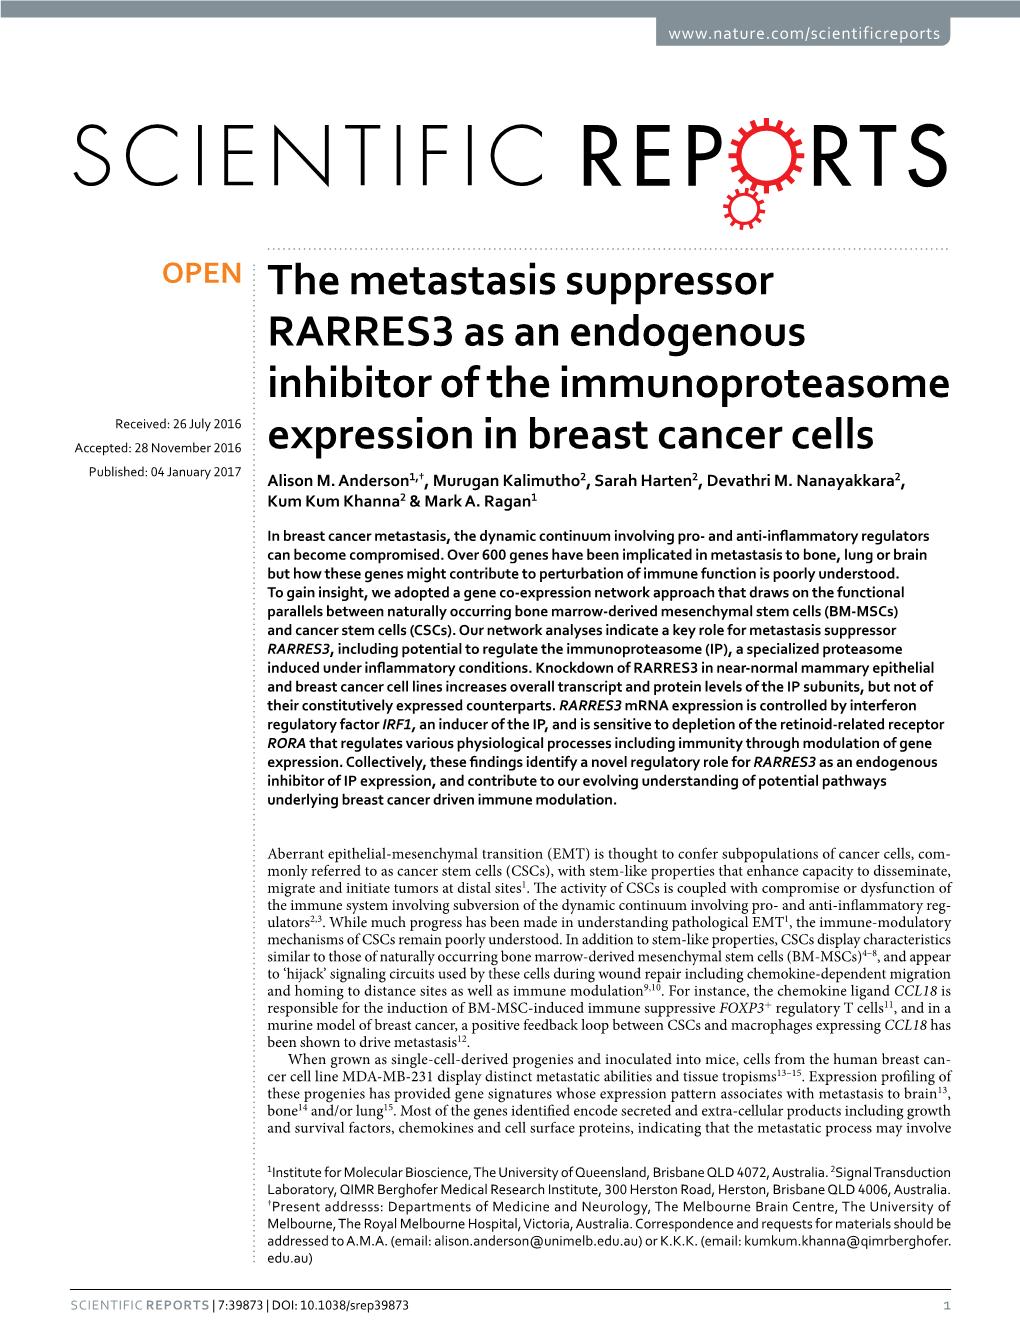 The Metastasis Suppressor RARRES3 As an Endogenous Inhibitor of The